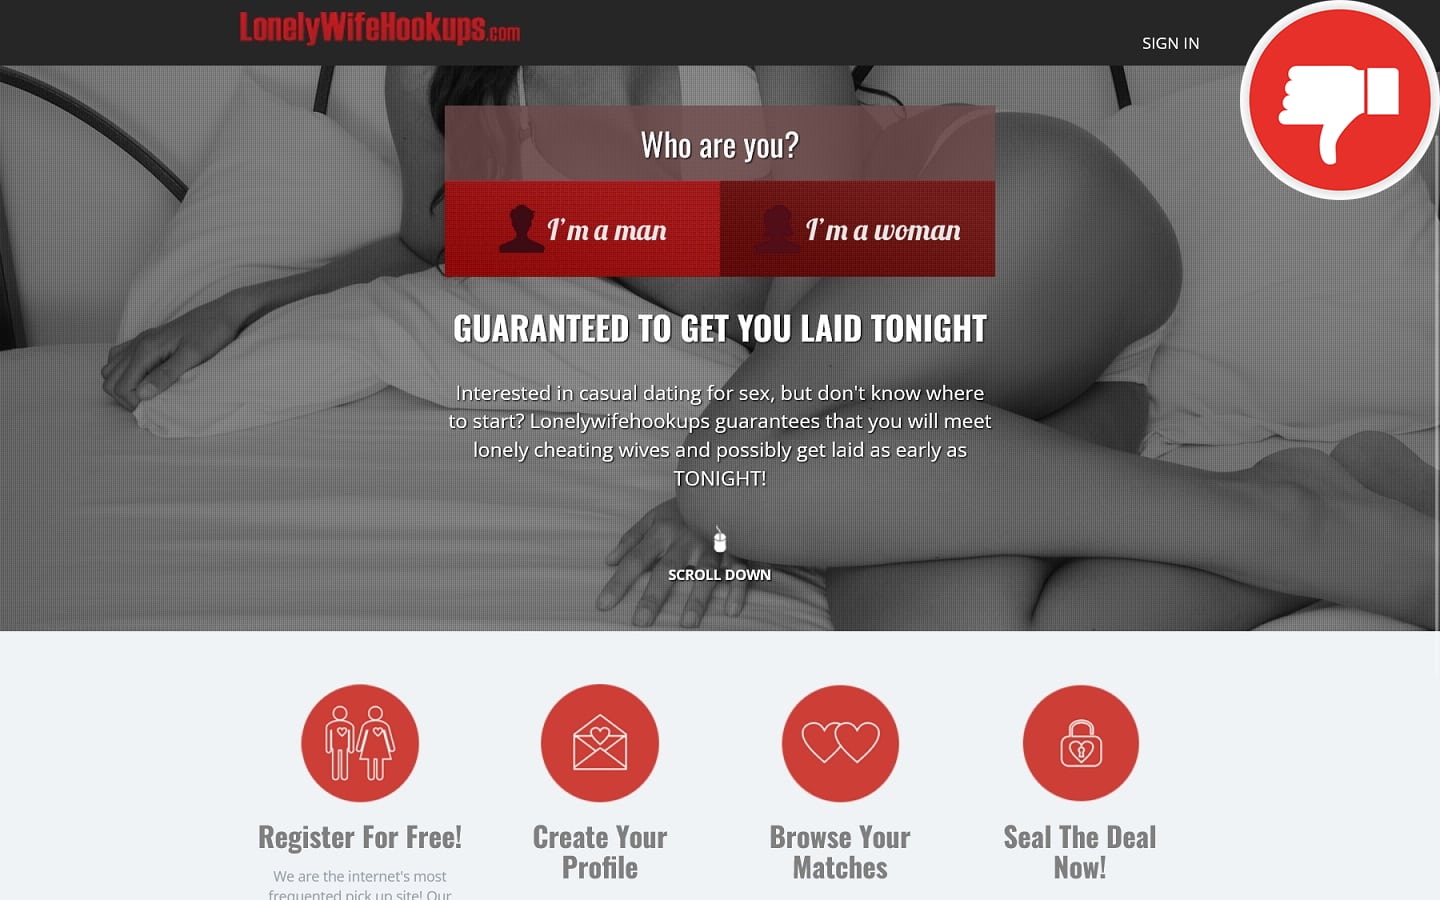 Review LonelyWifeHookups.com scam experience